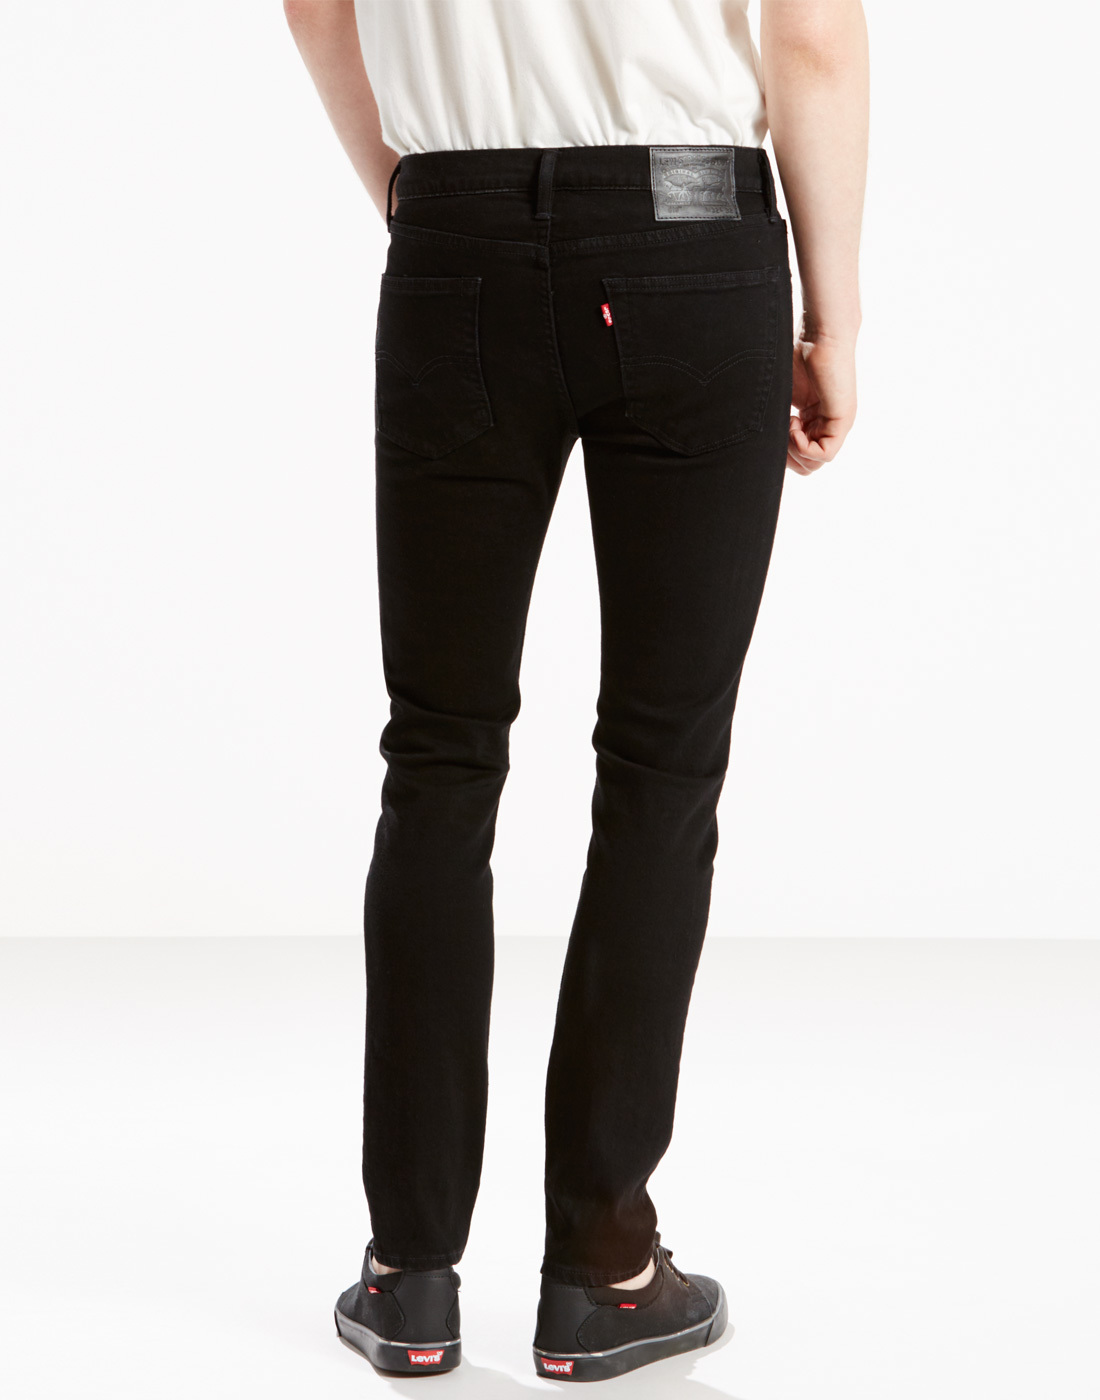 LEVI'S® 519 Retro Indie Mod Extreme Skinny Denim Jeans in Rooftop